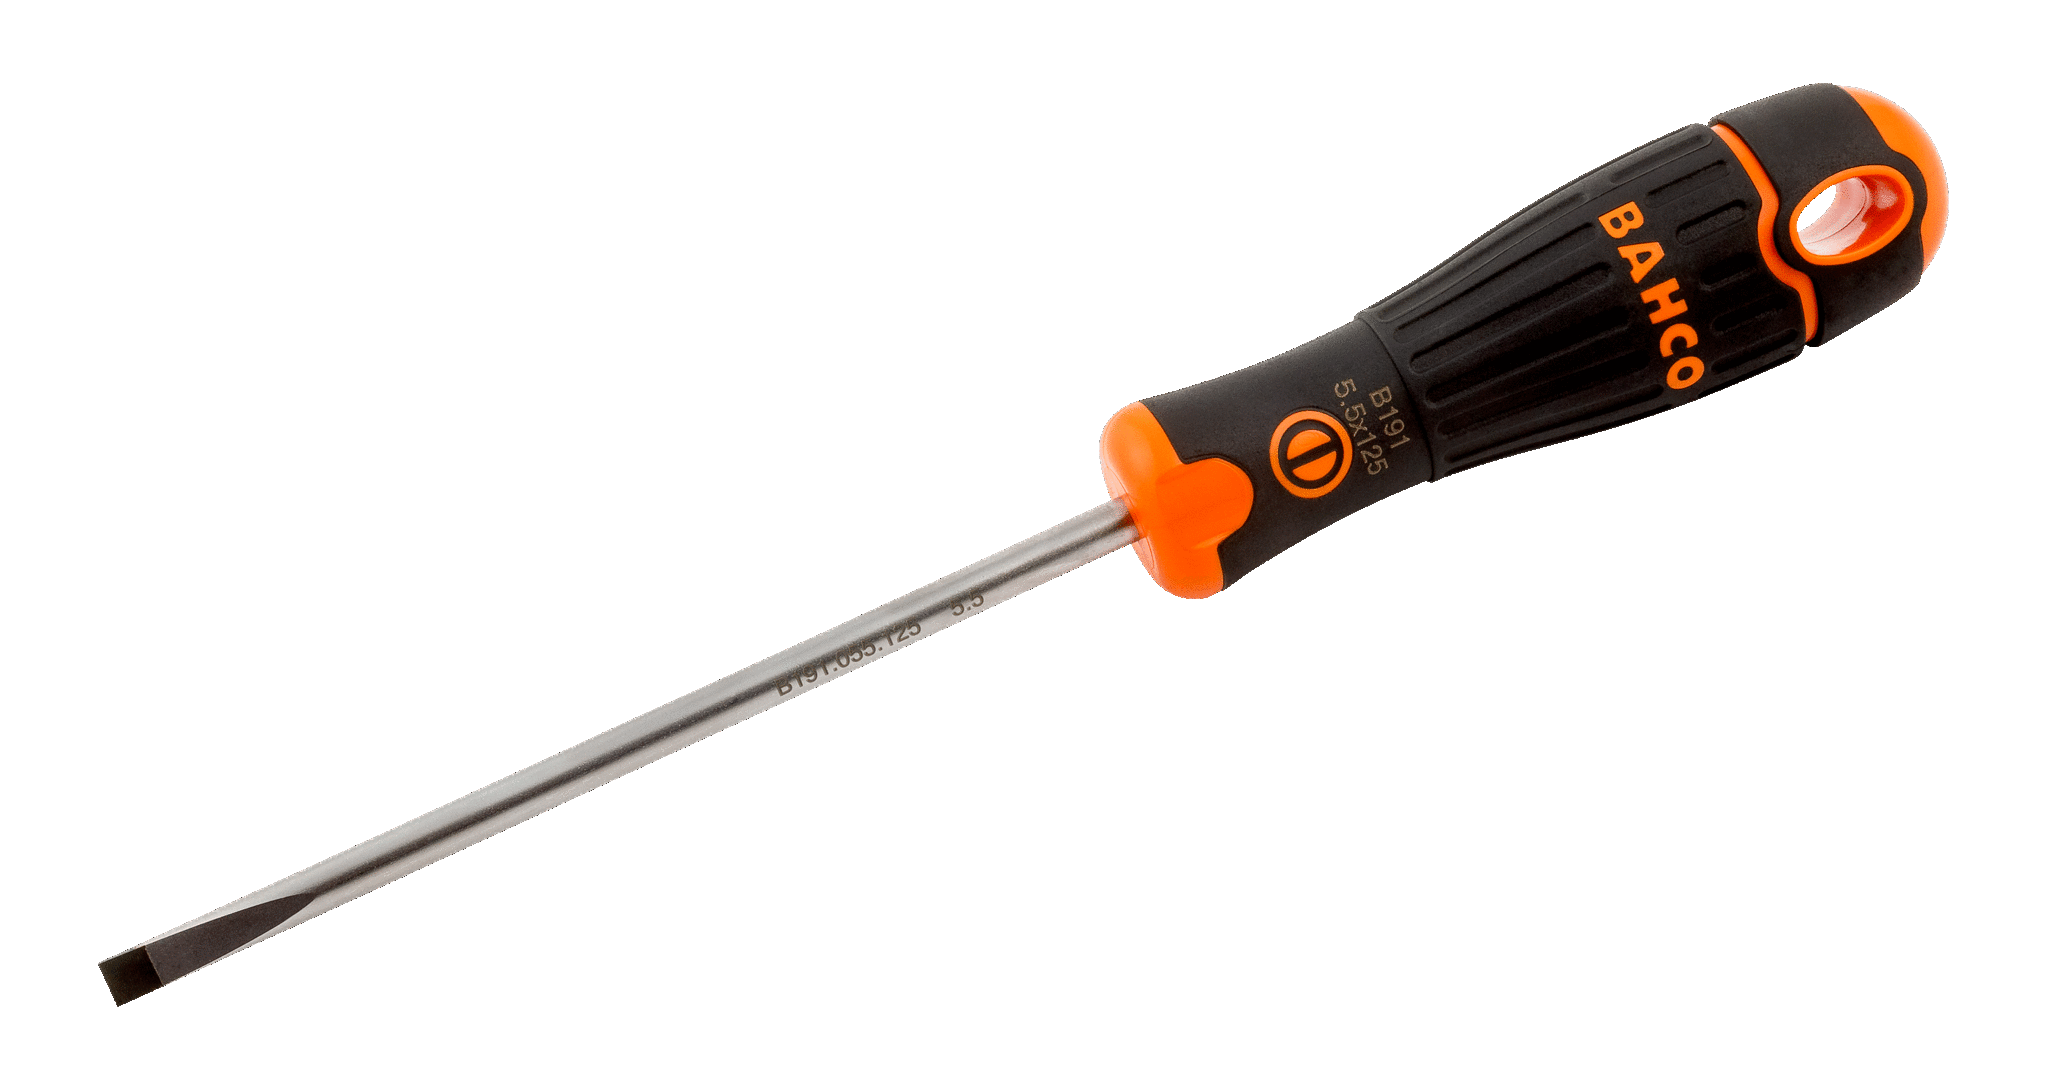 Bahco 196065150 bahcofit Insulated Screwdriver Slotted Tip 6.5 x 150 mm 